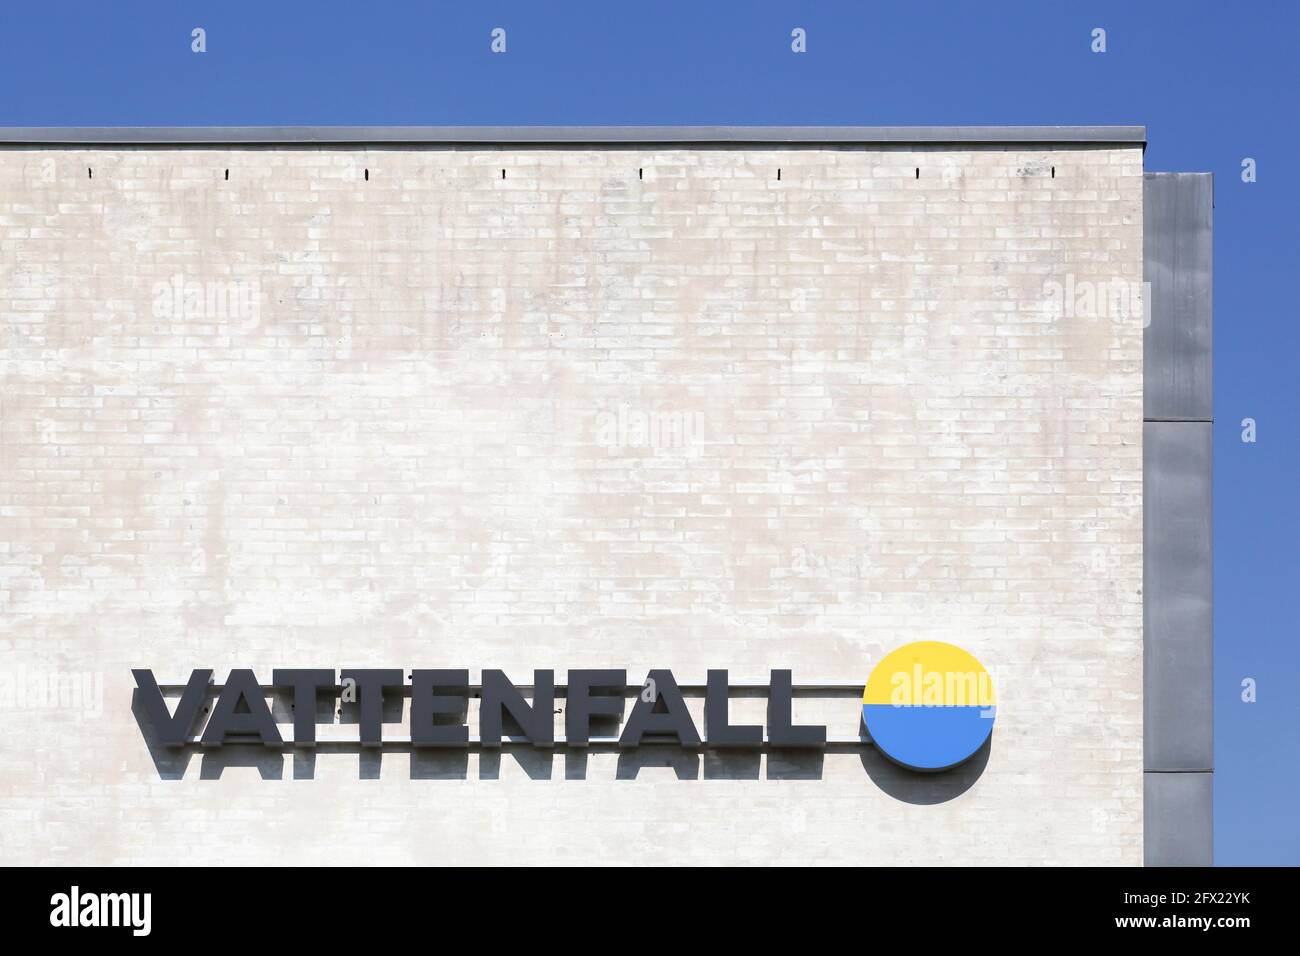 Kolding, Denmark - August 16, 2020: Vattenfall is a Swedish power company, wholly owned by the Swedish government Stock Photo